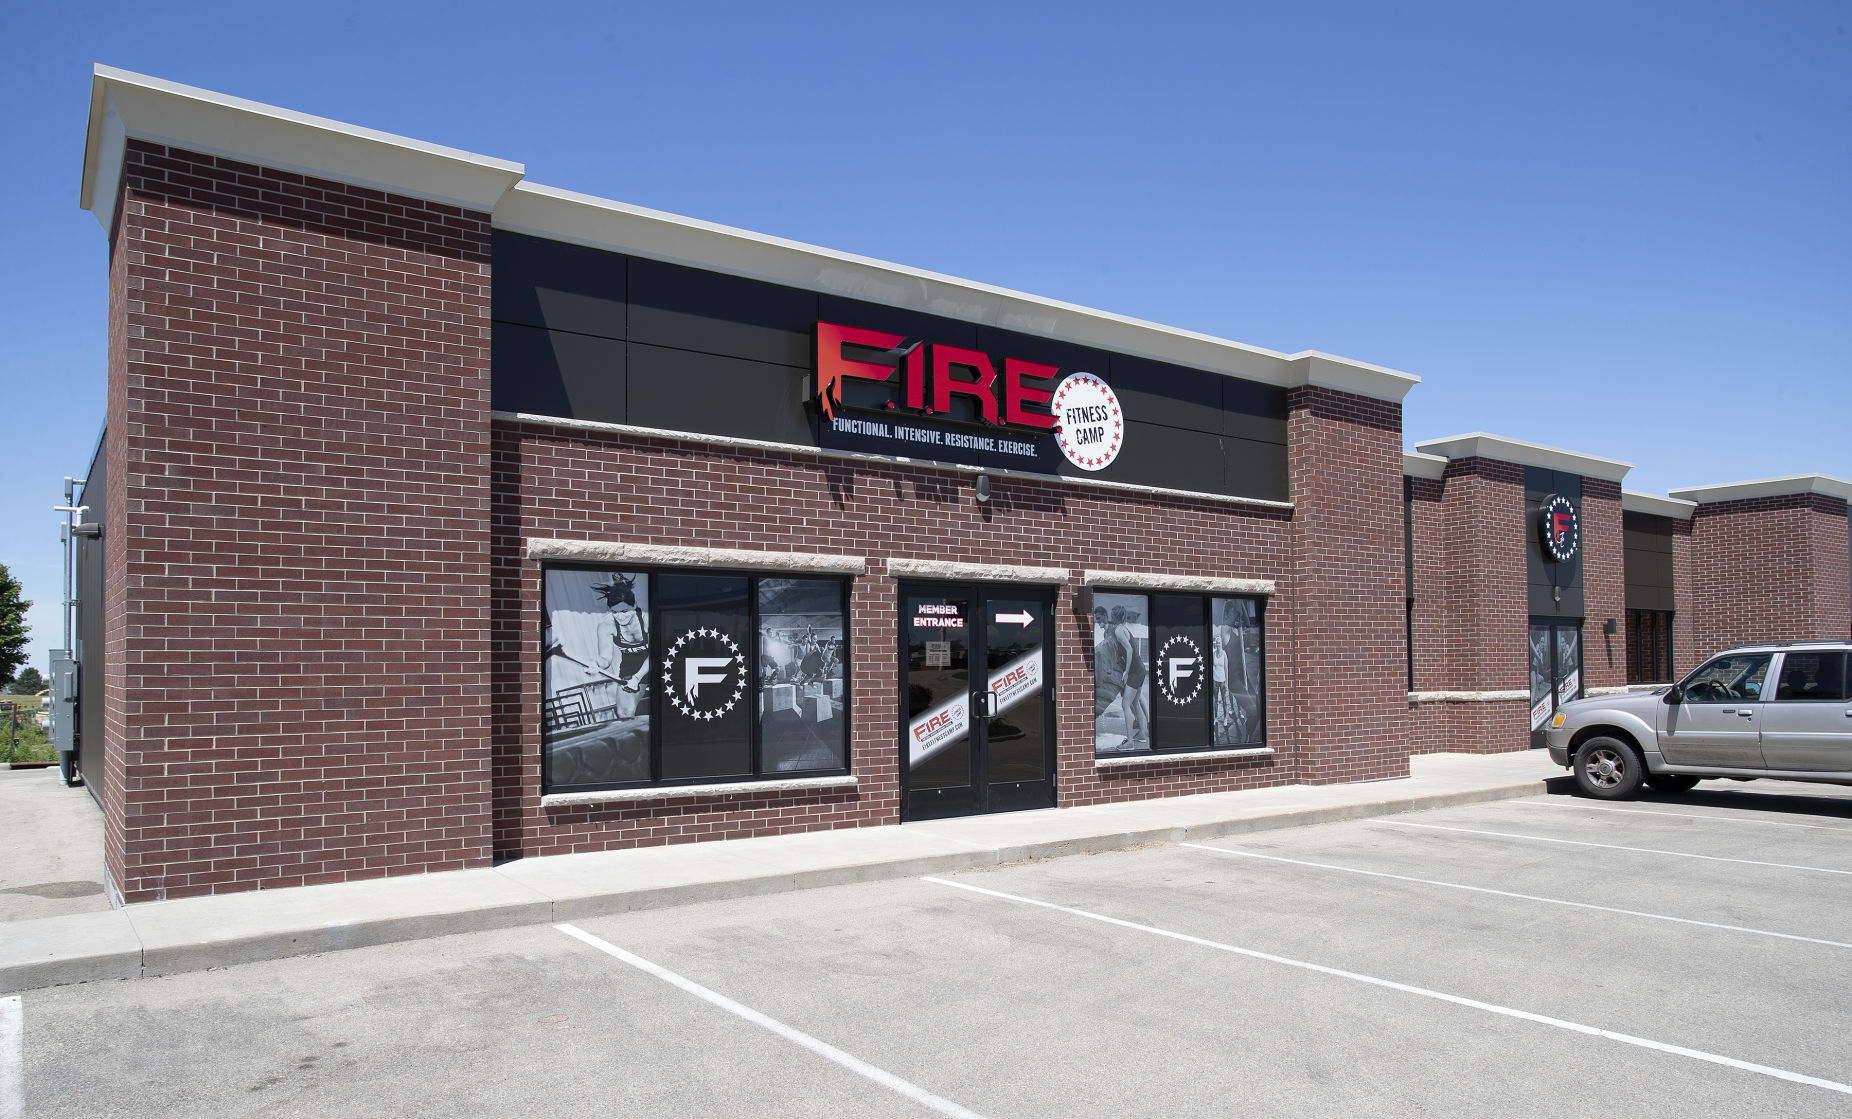 FIRE Fitness Camp is located on Vision Drive in Platteville, Wis.    PHOTO CREDIT: Stephen Gassman